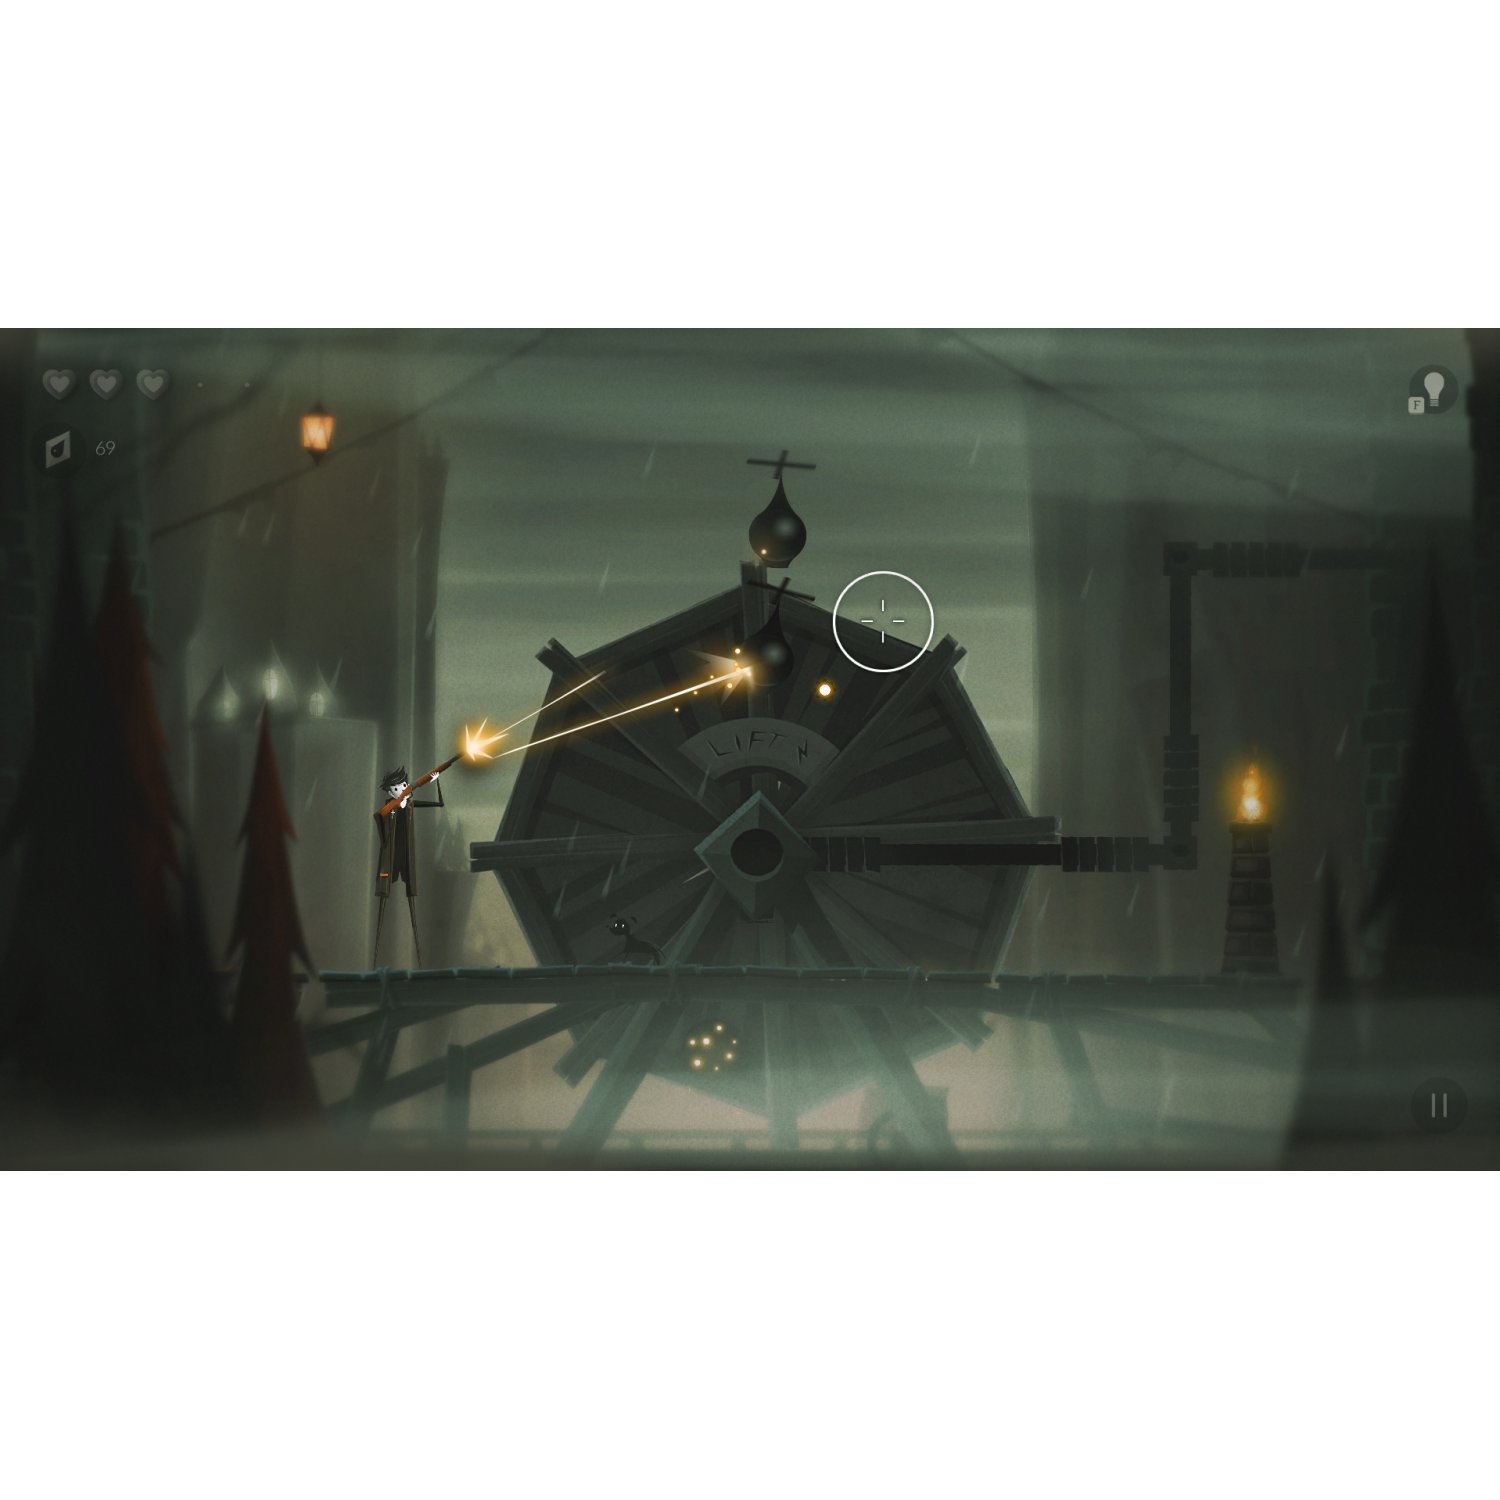 Neversong, Pinstripe, Neversong & Pinstripe, Neversong and Pinstripe, Multi-language, Neversong & Pinstripe (Multi-Language), PS4, PlayStation 4, Beep Japan, Atmos Games, Nintendo Switch, Japan, release date, features, price, pre-order now, trailer, Screenshots